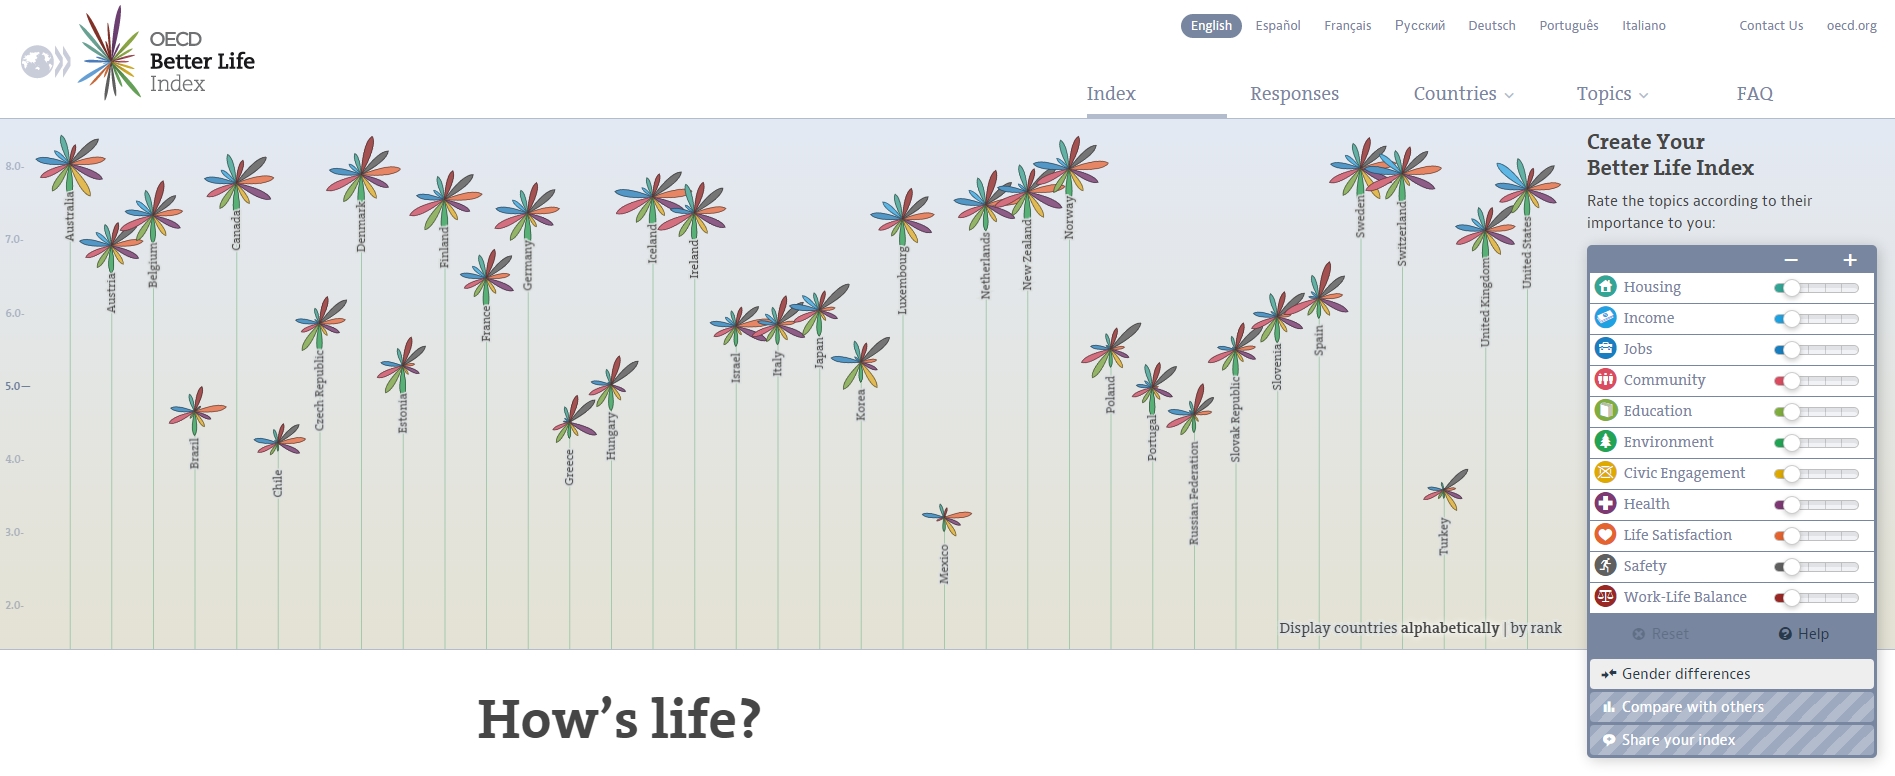 oecd better life index